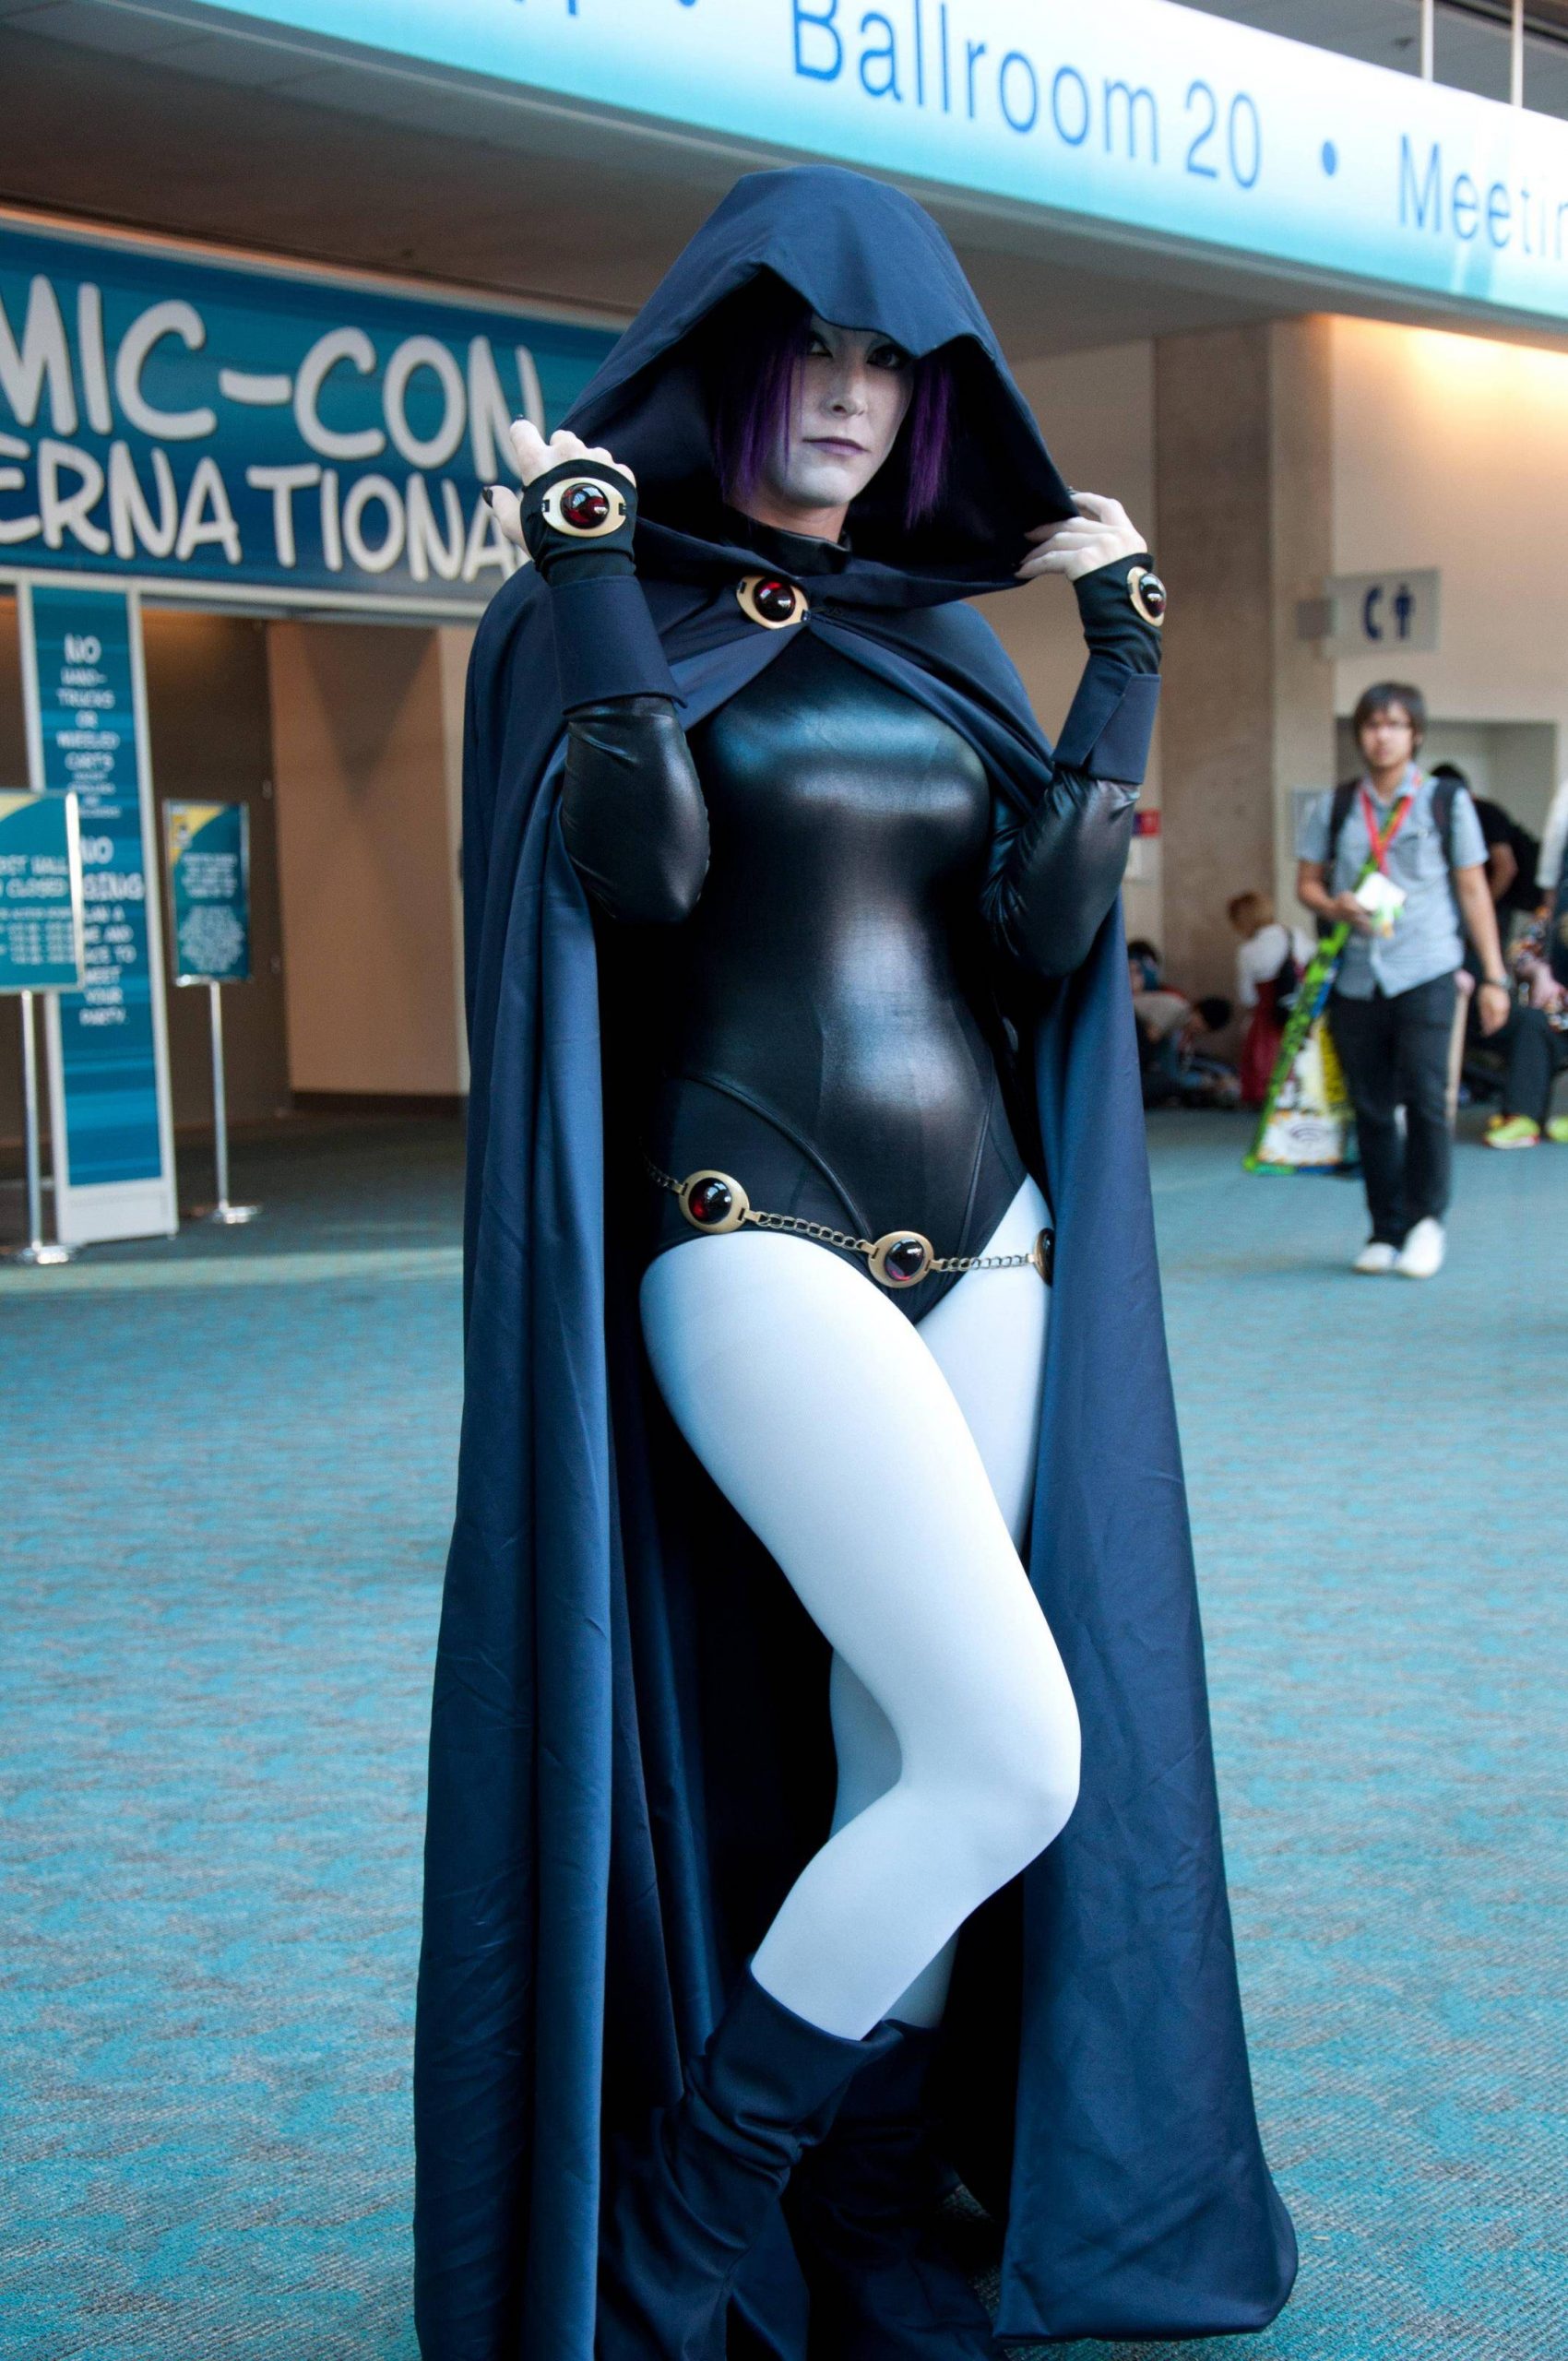 50+ Hot Pictures Of Raven From Teen Titans, DC Comics. 10